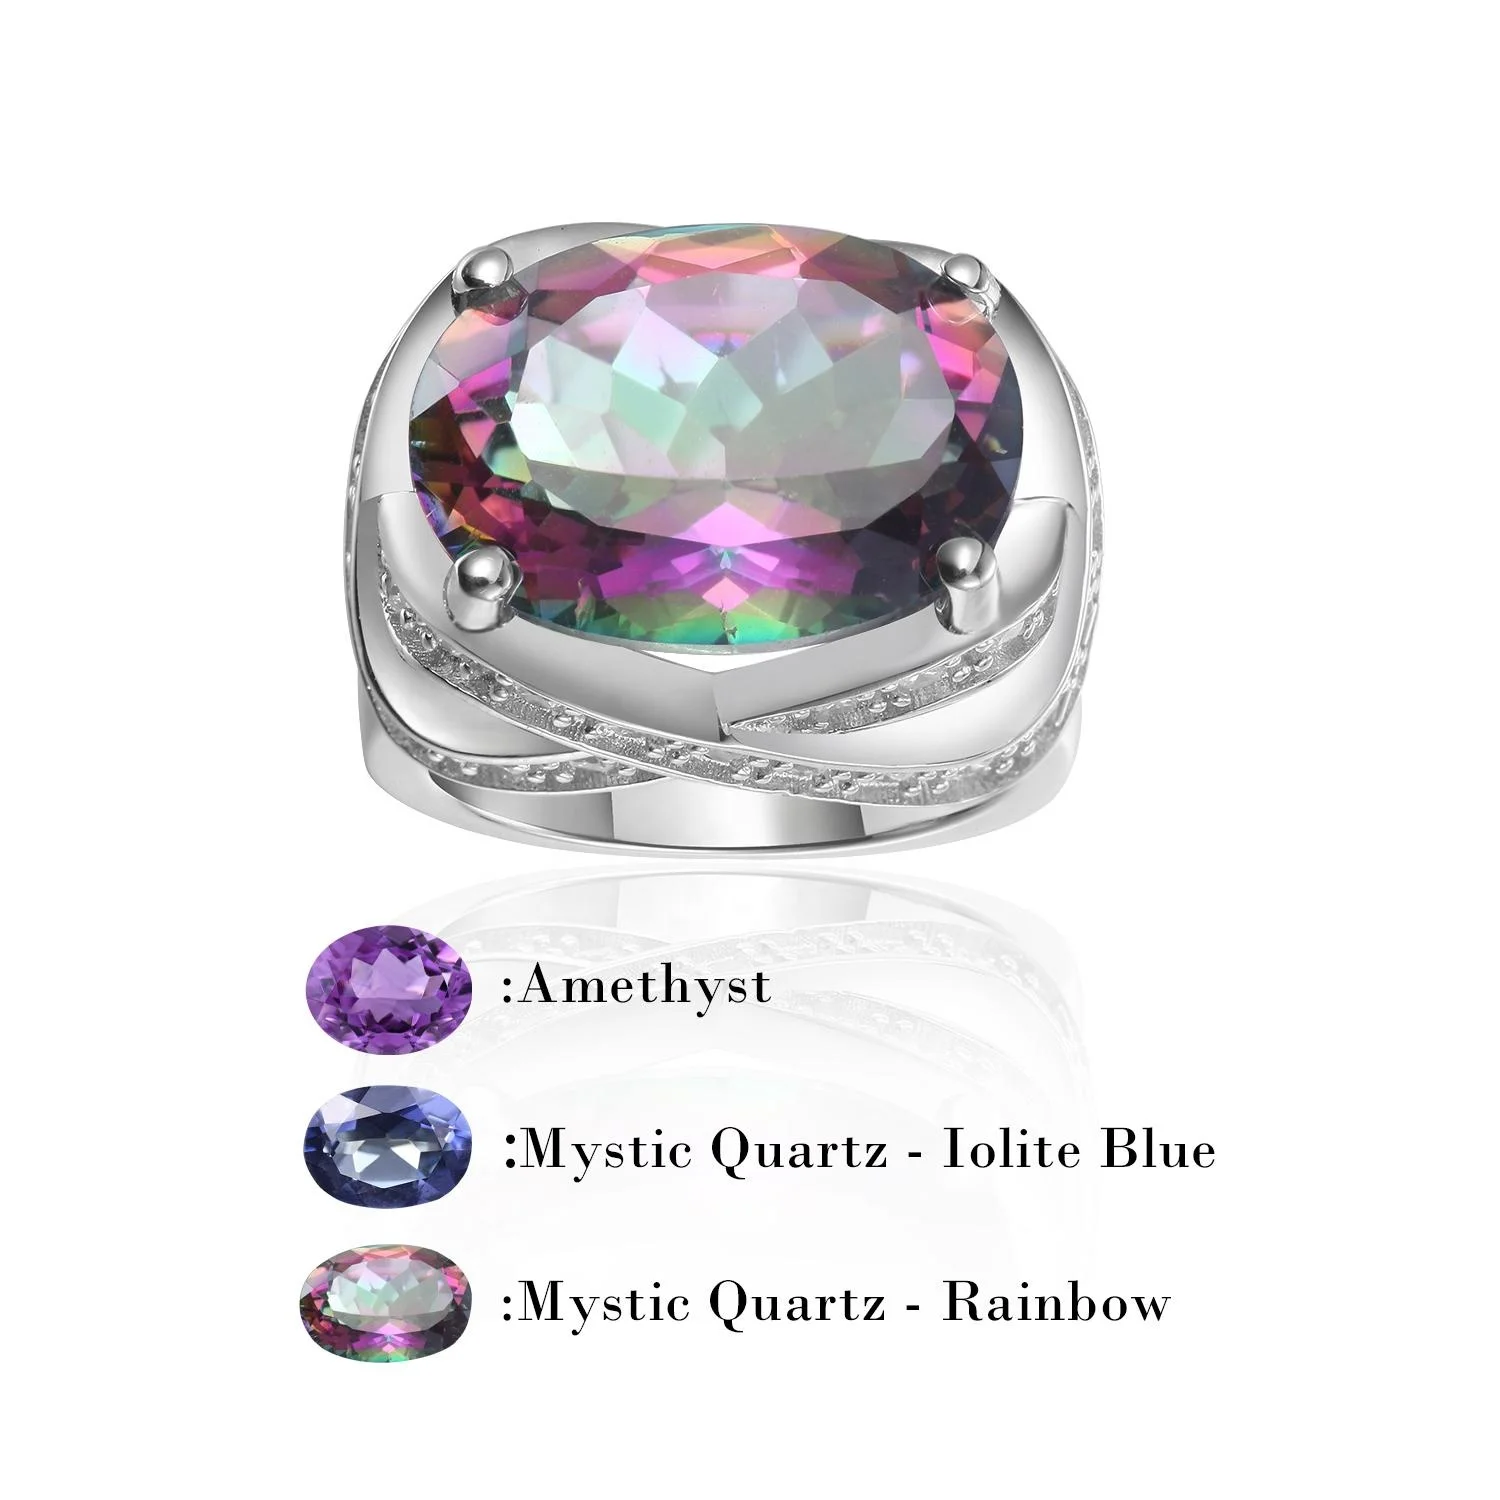 

Abiding Fancy Luxurious Fashion 12X16 Big Natural Gemstone 925 Sterling Silver Jewelry Rings Women For Wedding